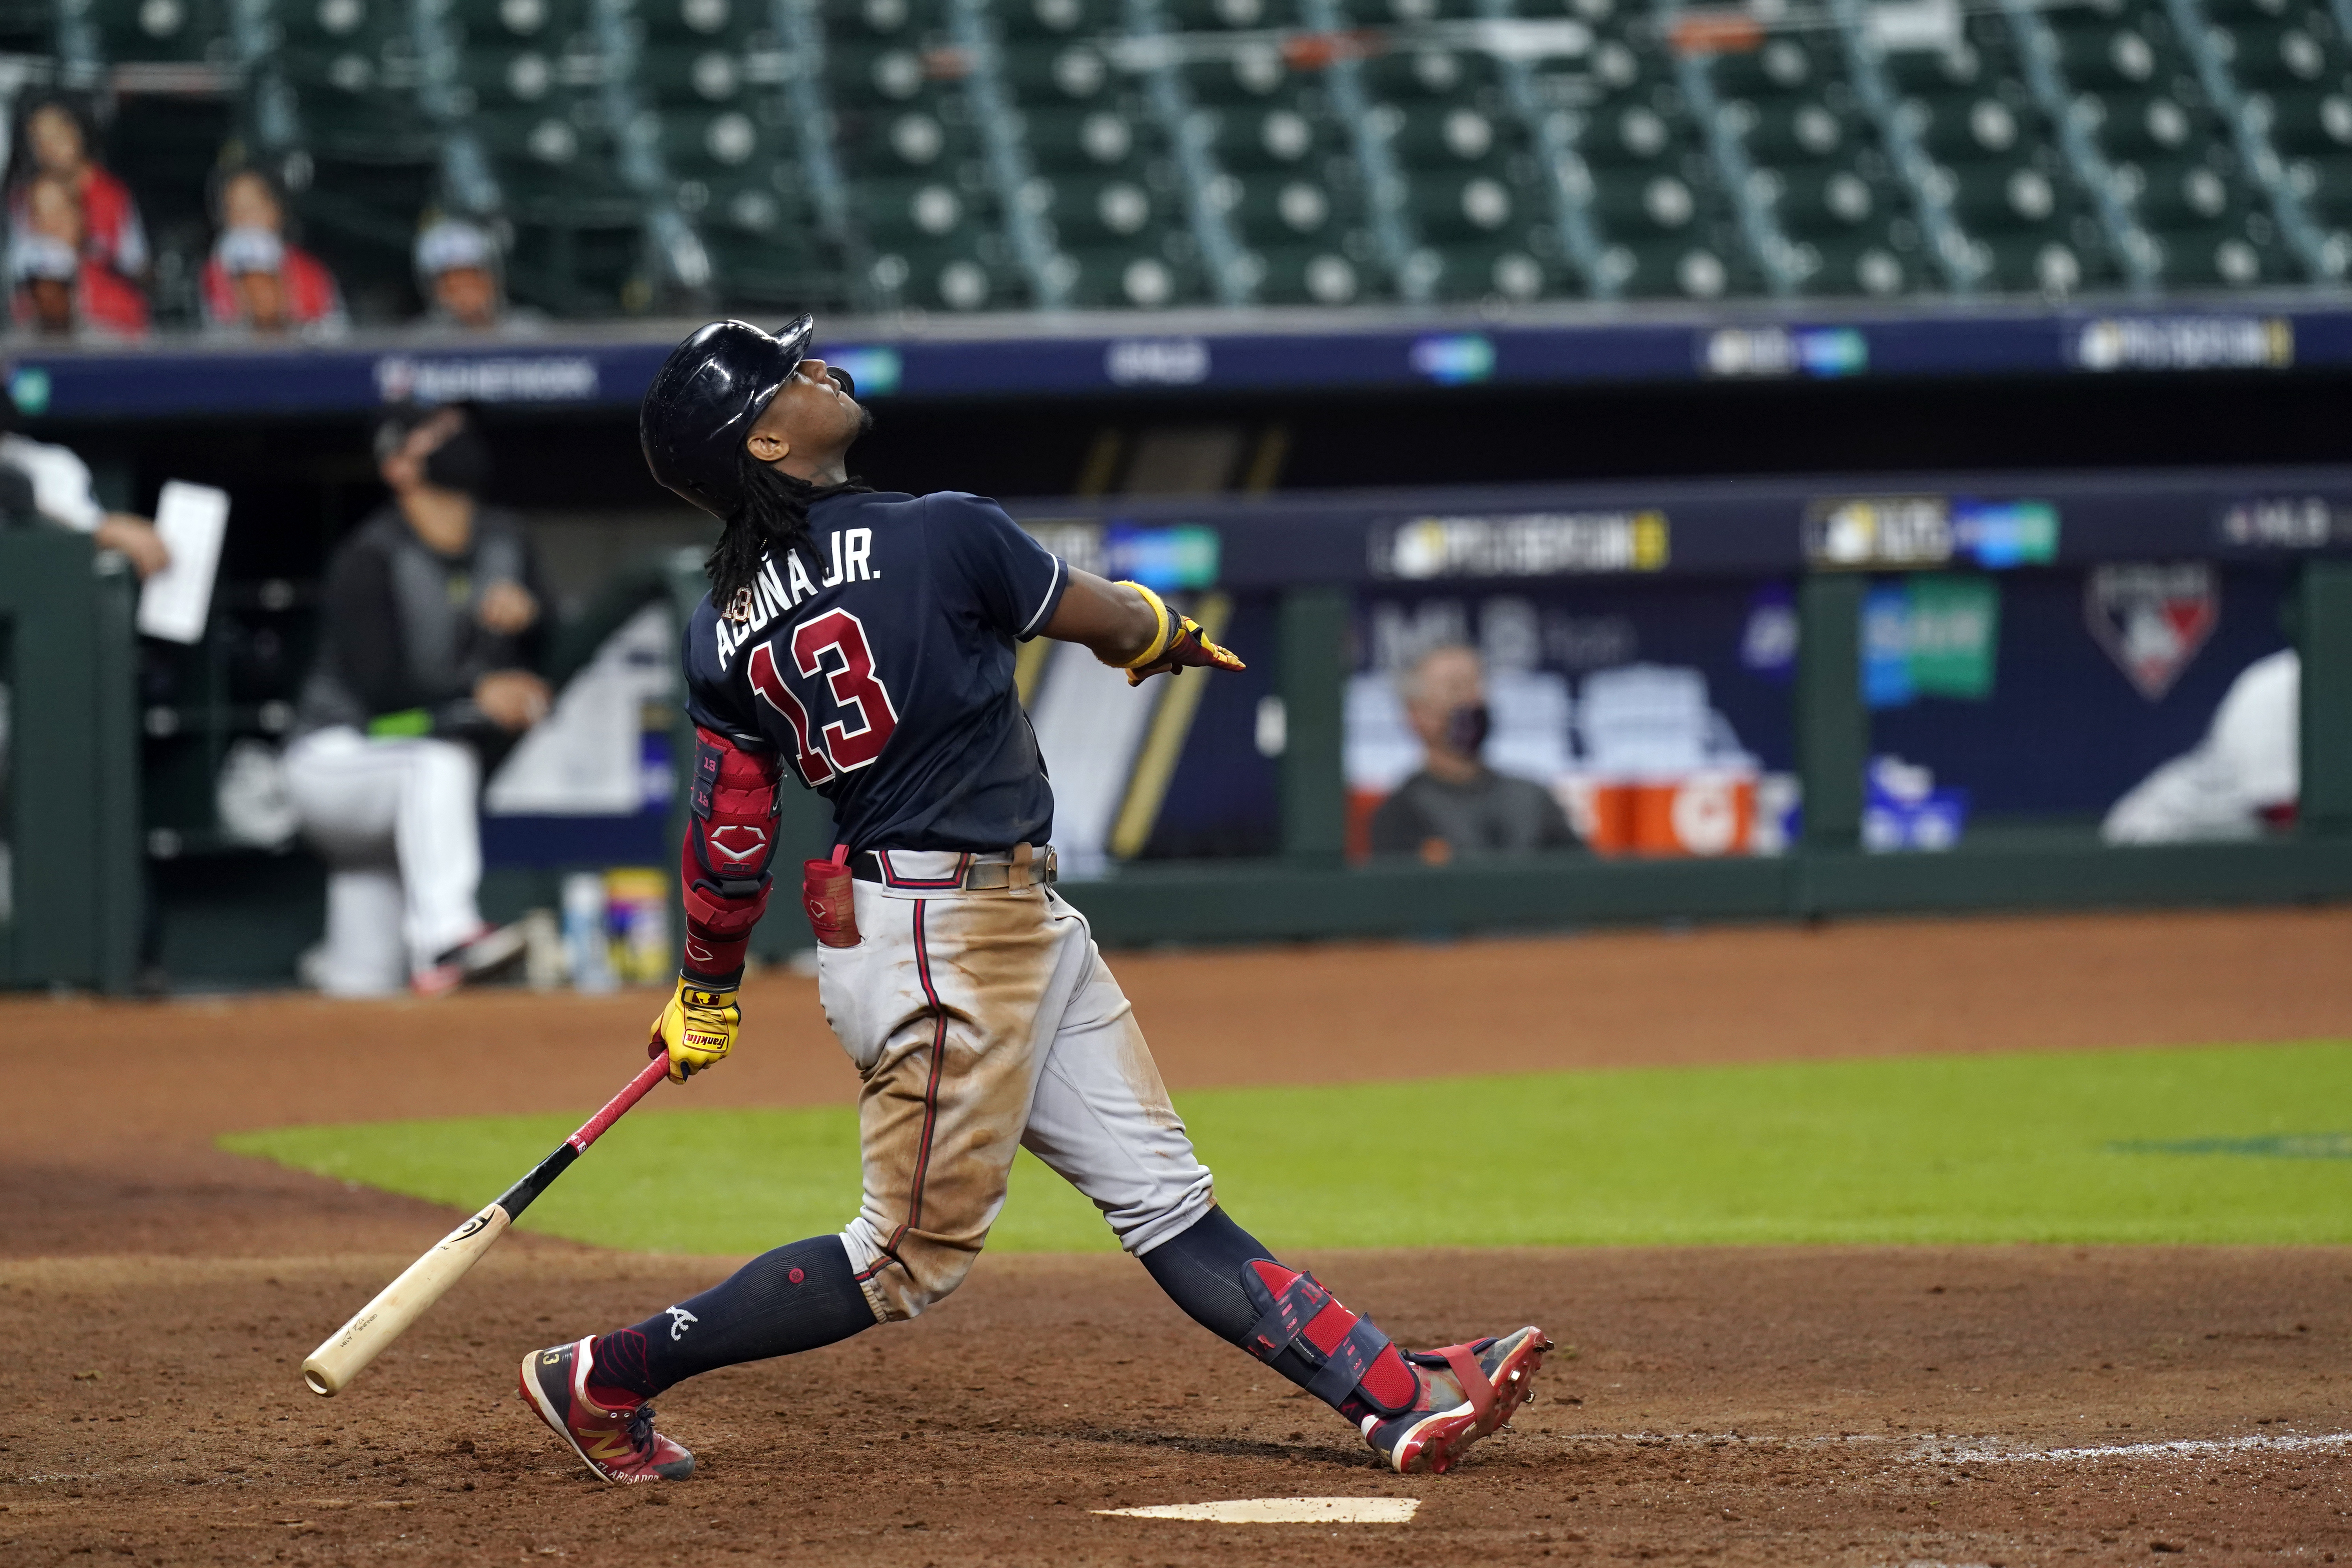 All I wanted was one more win' - Ozzie Albies talks Ron Washington